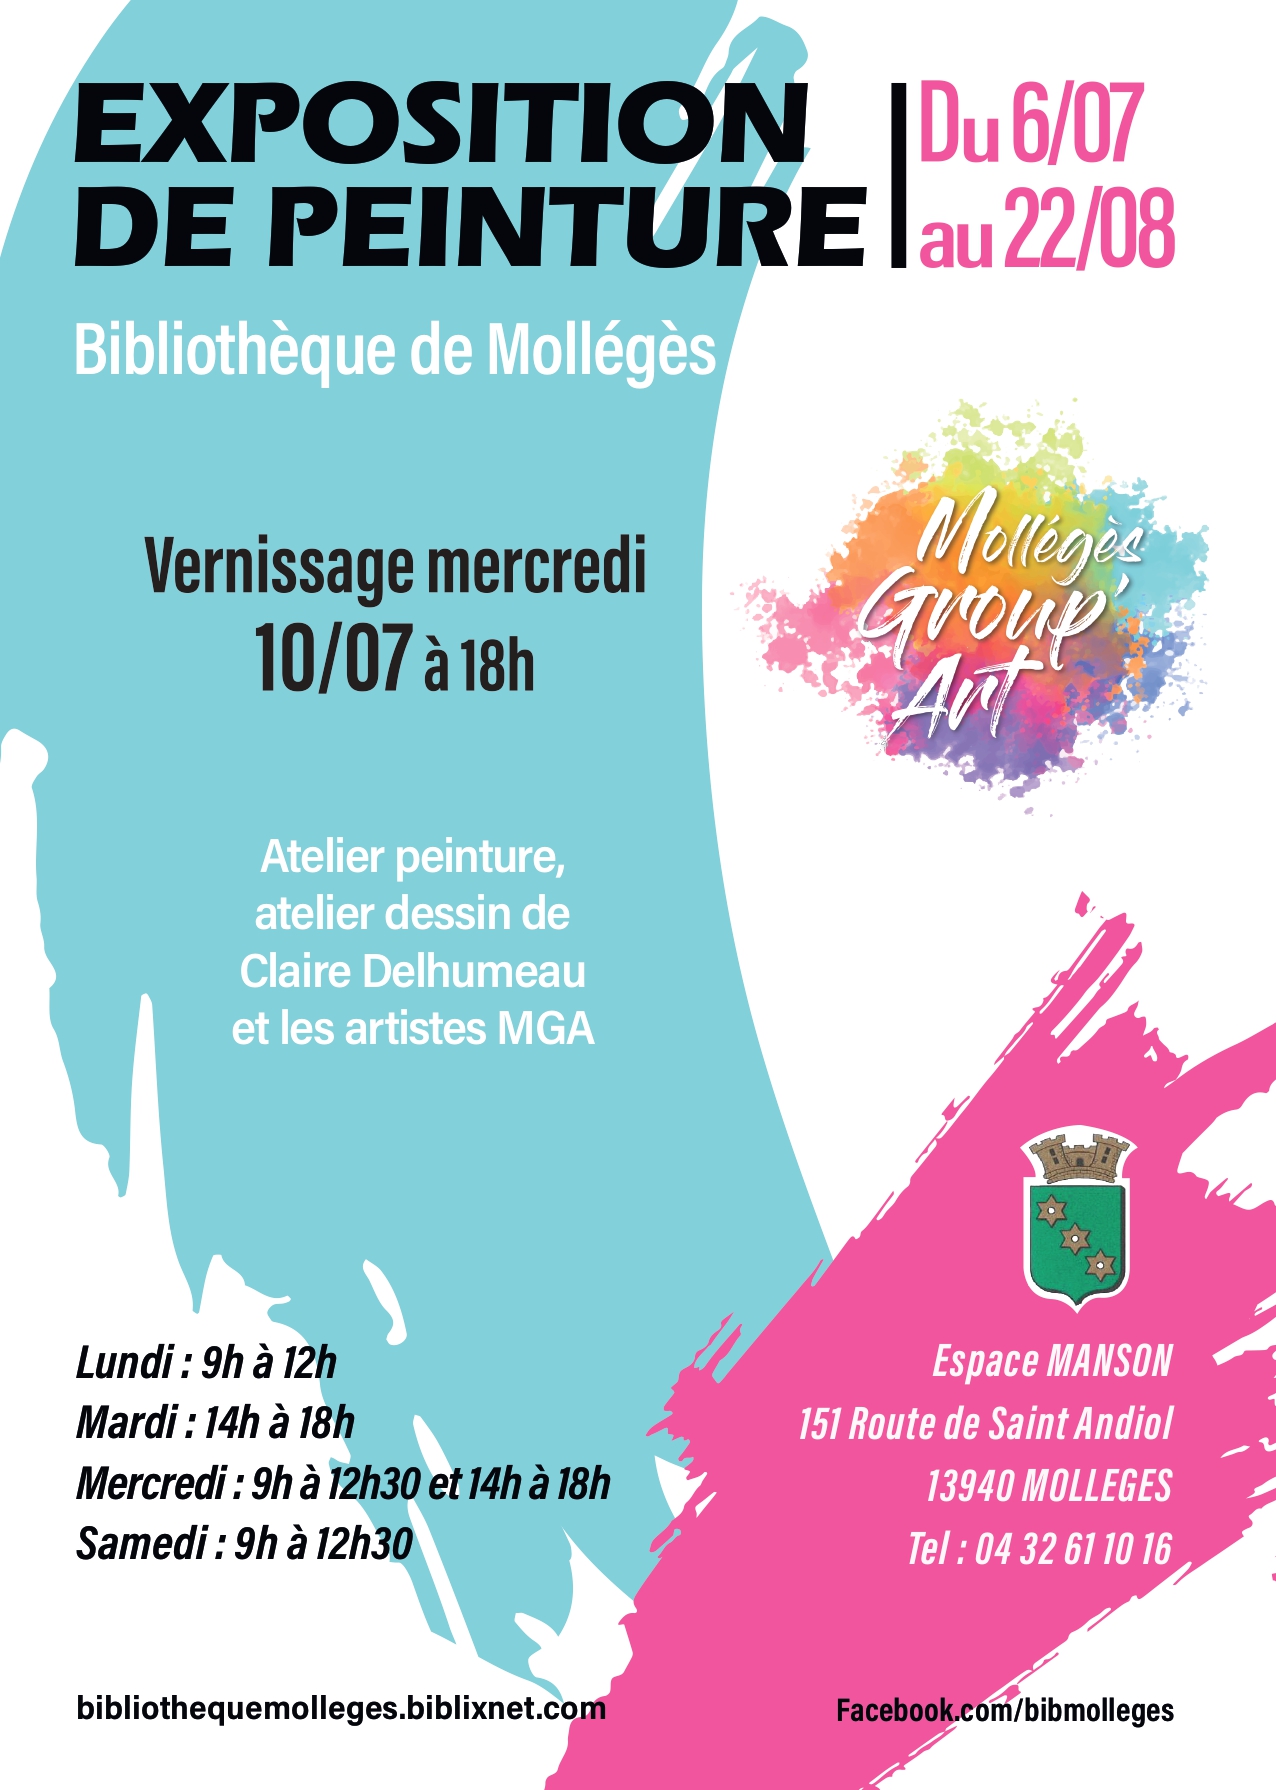 molleges groupart affiche 2024_pages-to-jpg-0001.jpg